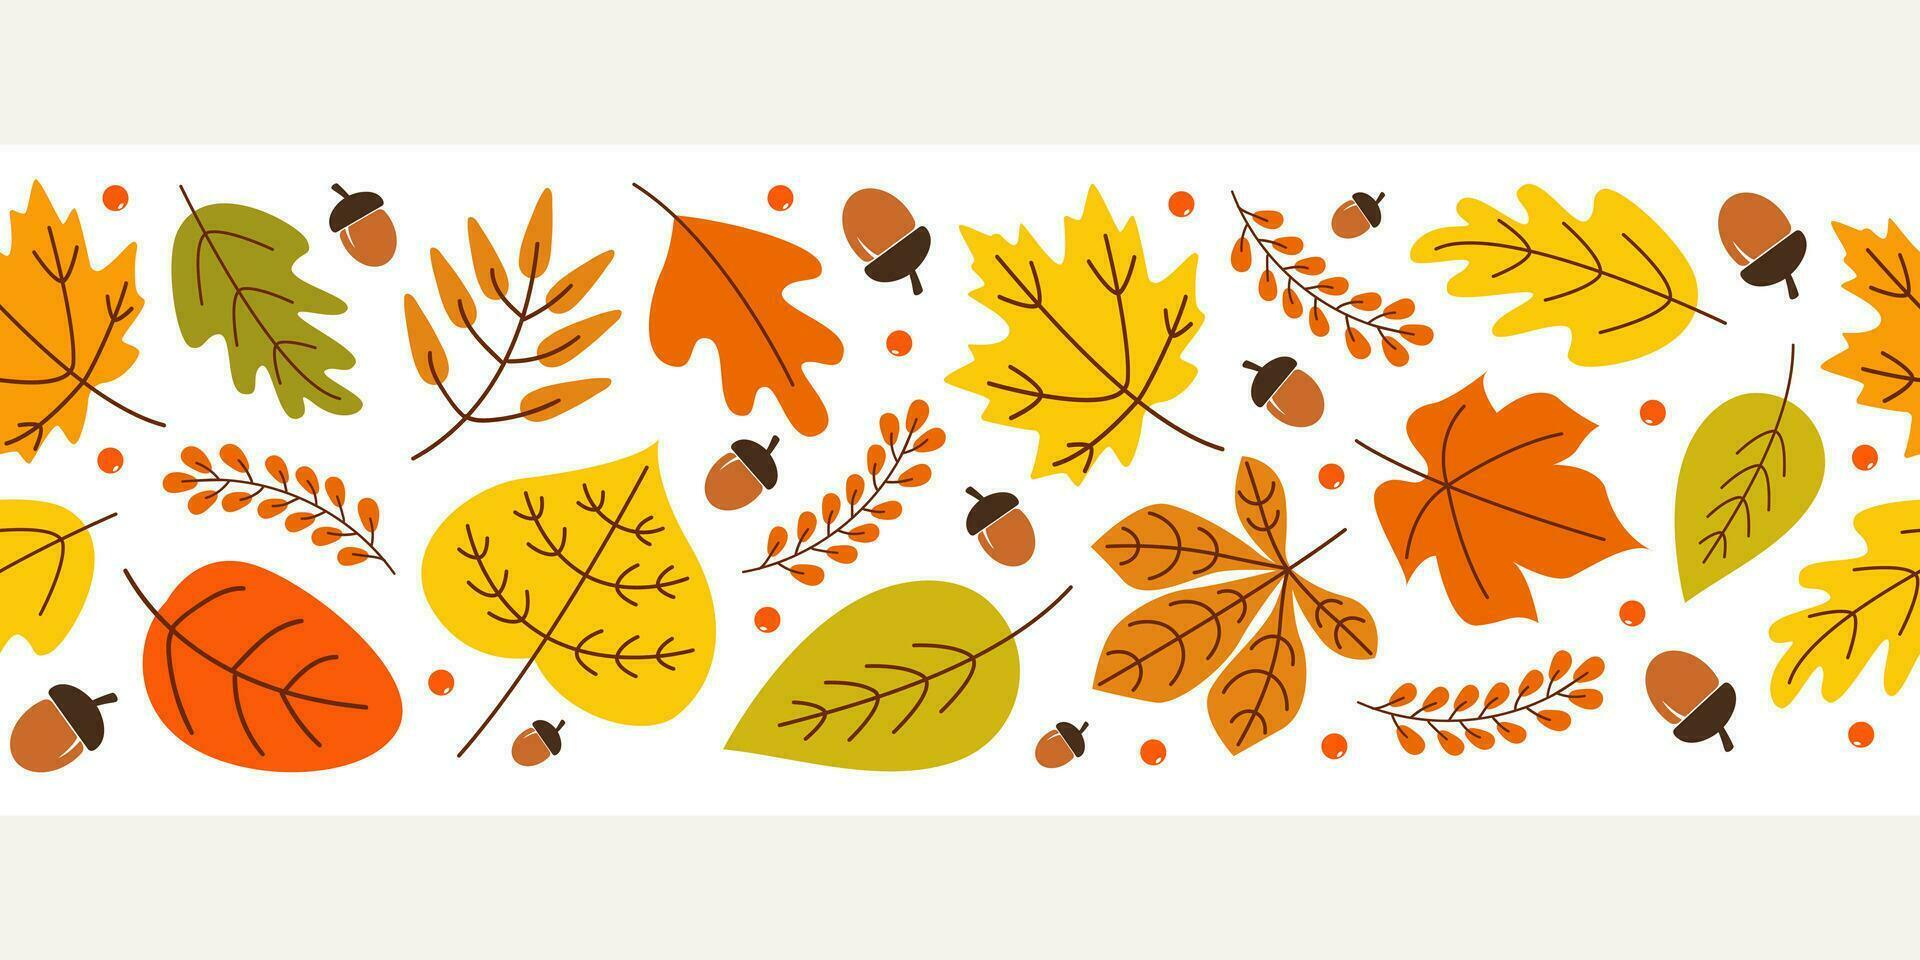 Horizontal seamless background with colorful autumn leaves. Vector illustration.